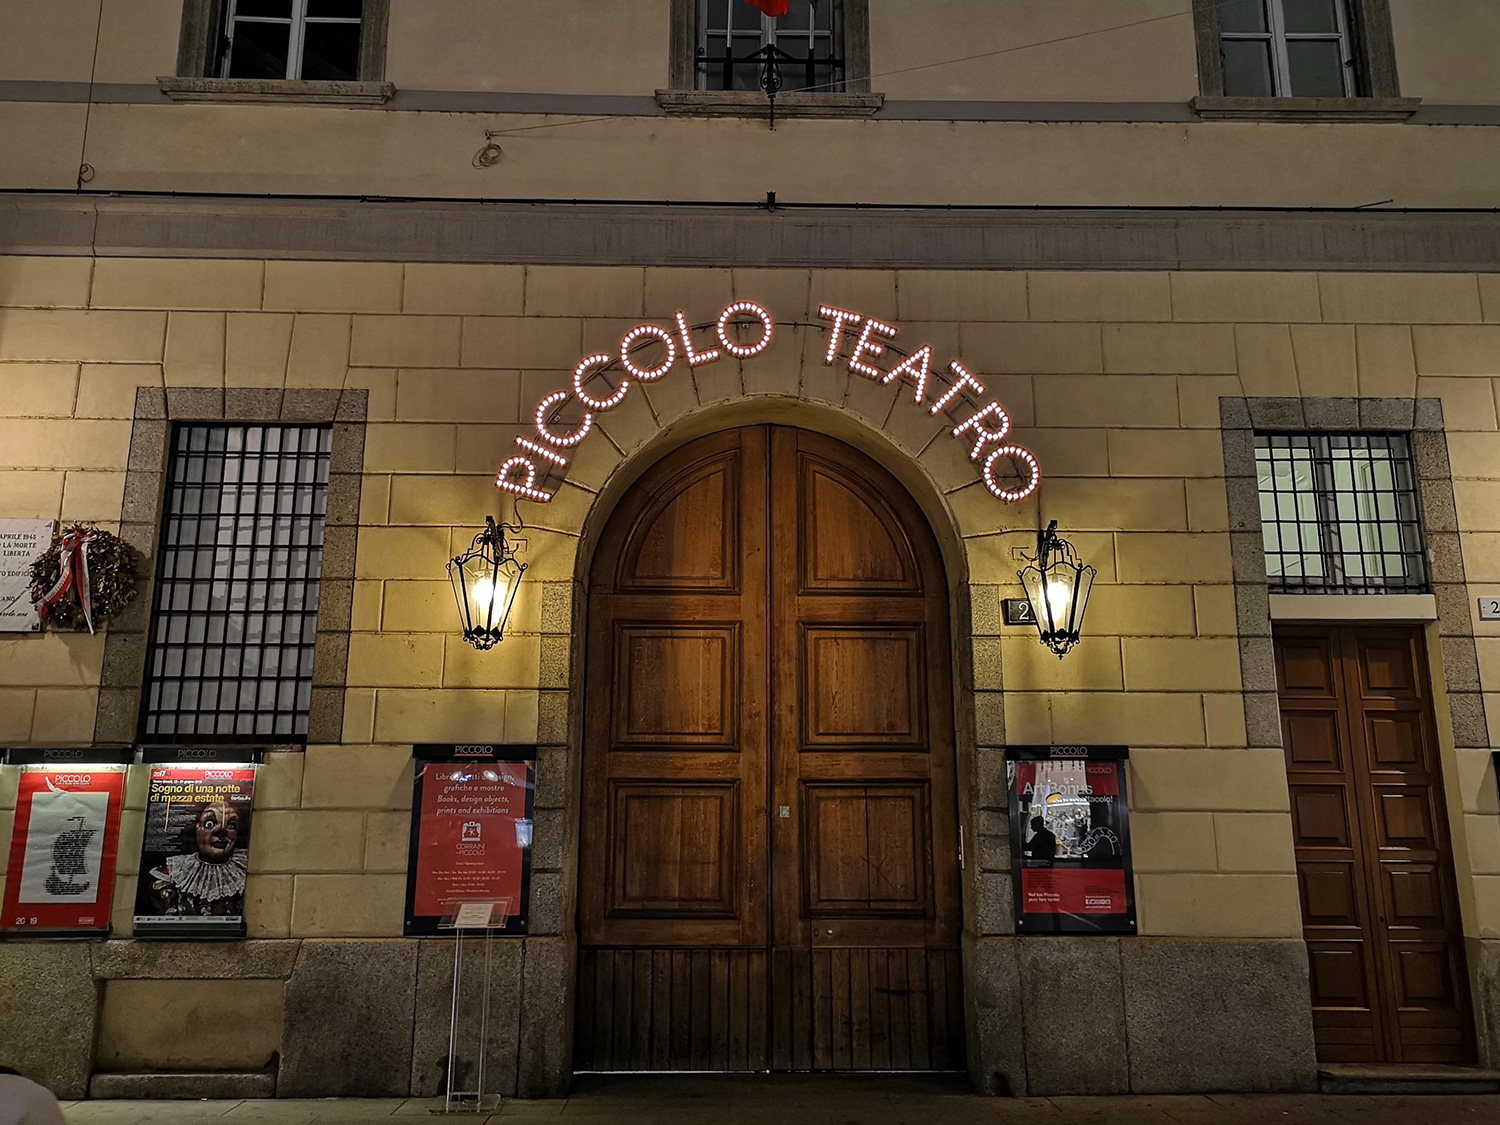 huawei p20 pro leica street photography feature piccolo teatro